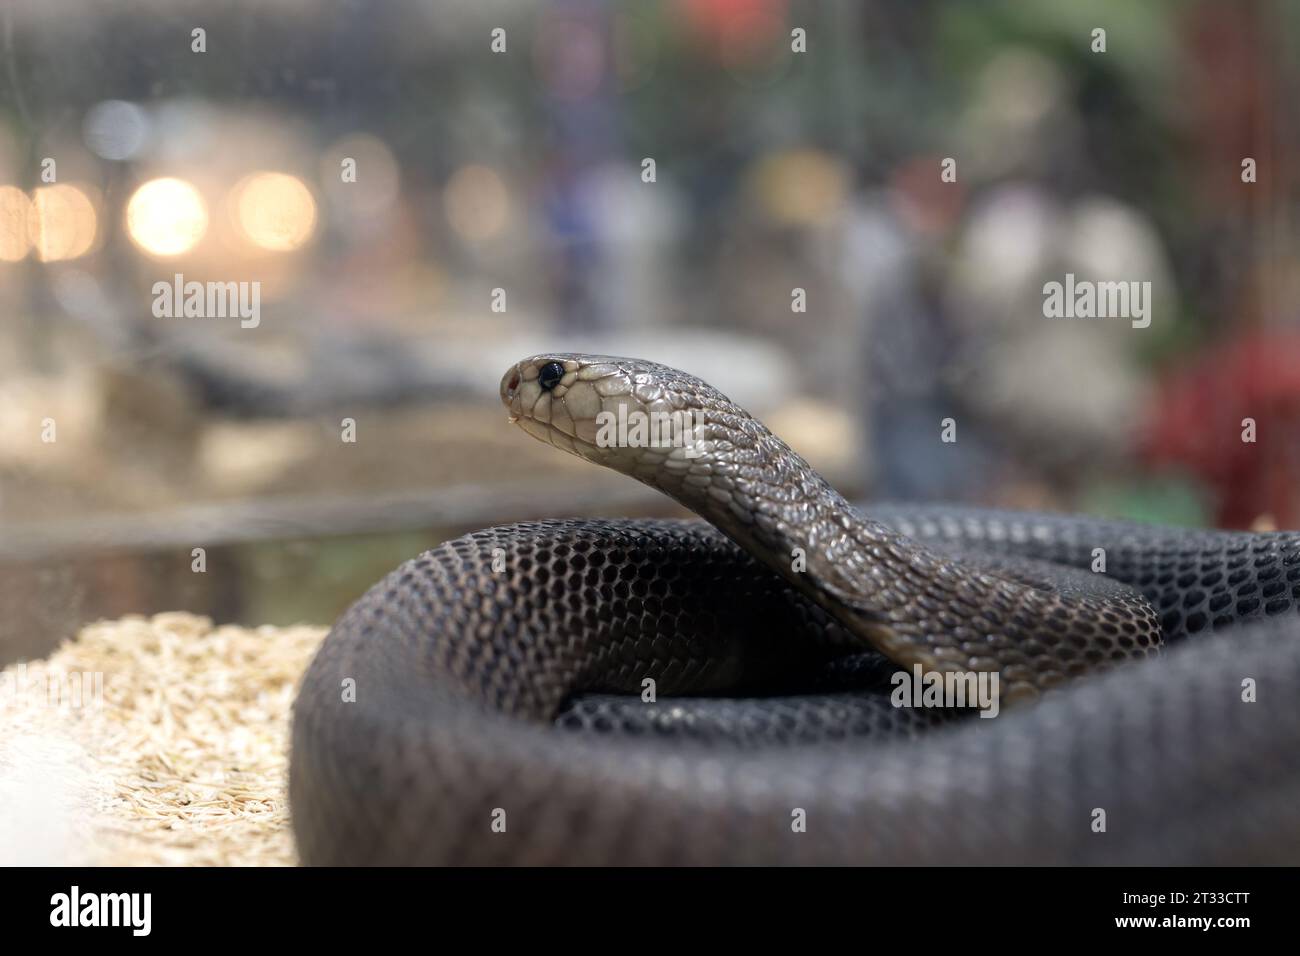 Close-up of a cobra coiled on the ground. The cobra is a venomous snake. Stock Photo